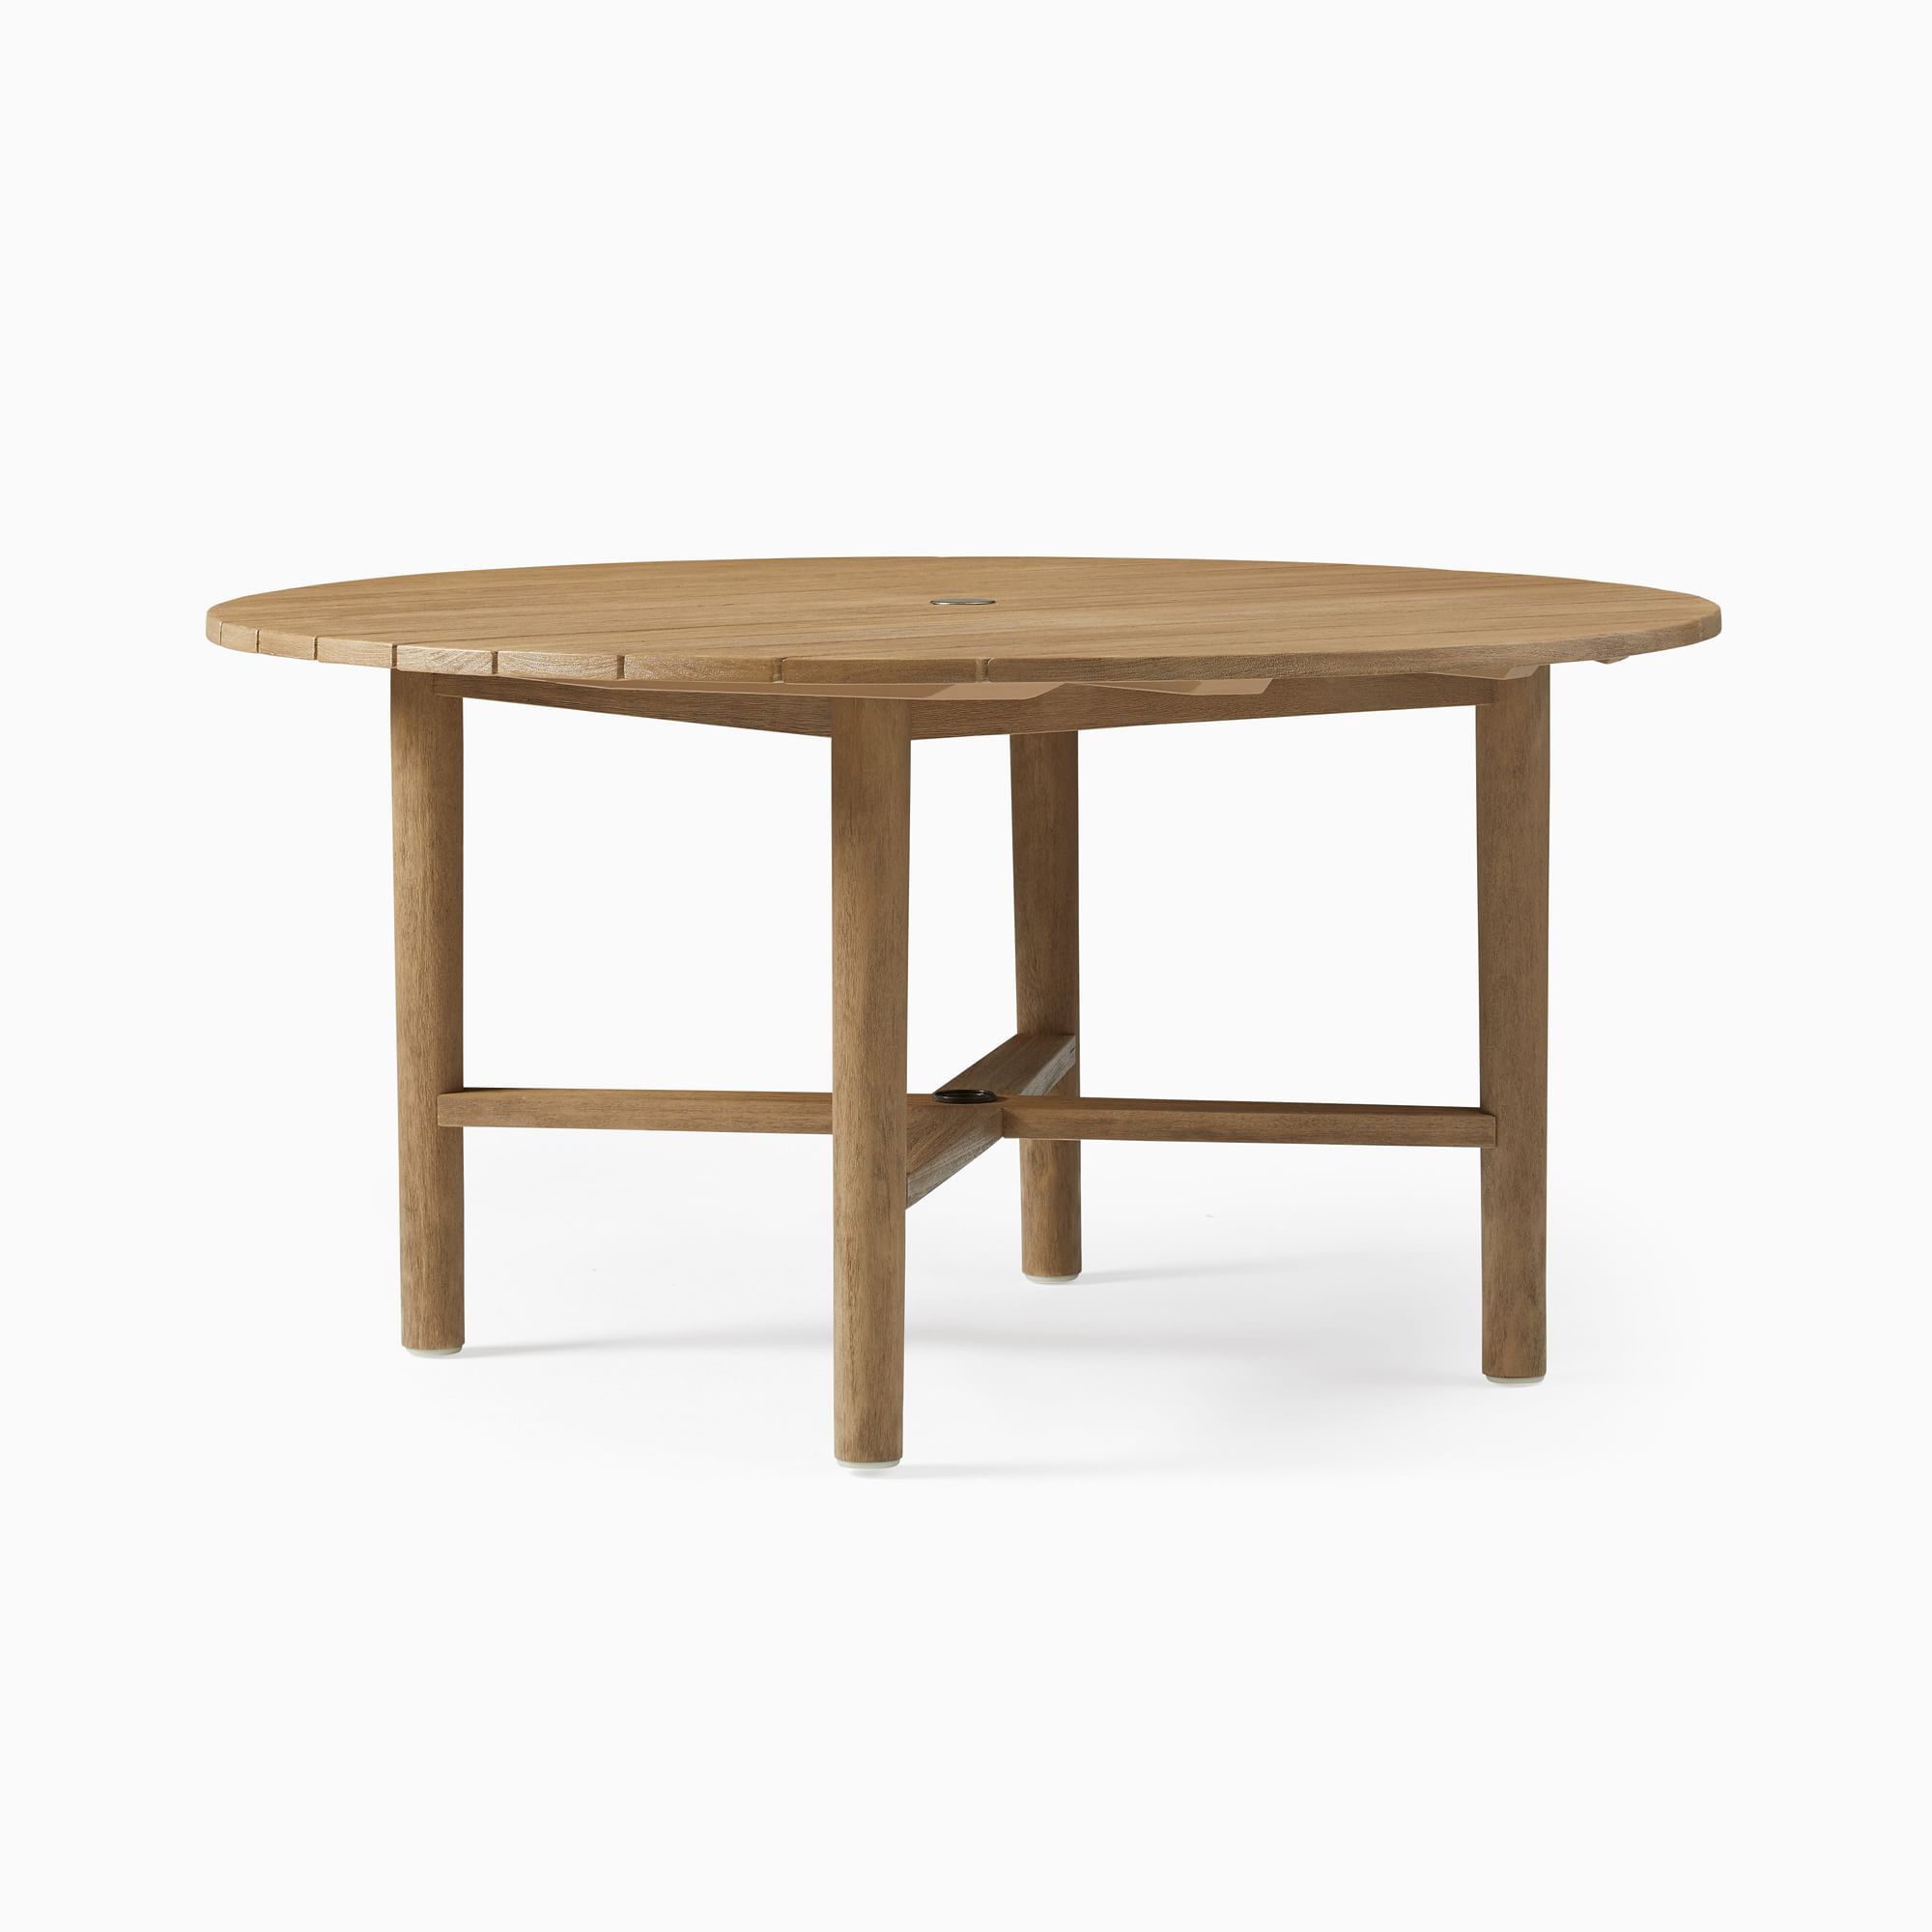 West Elm Hargrove Outdoor Round Dining Table (60") Brand New In Box